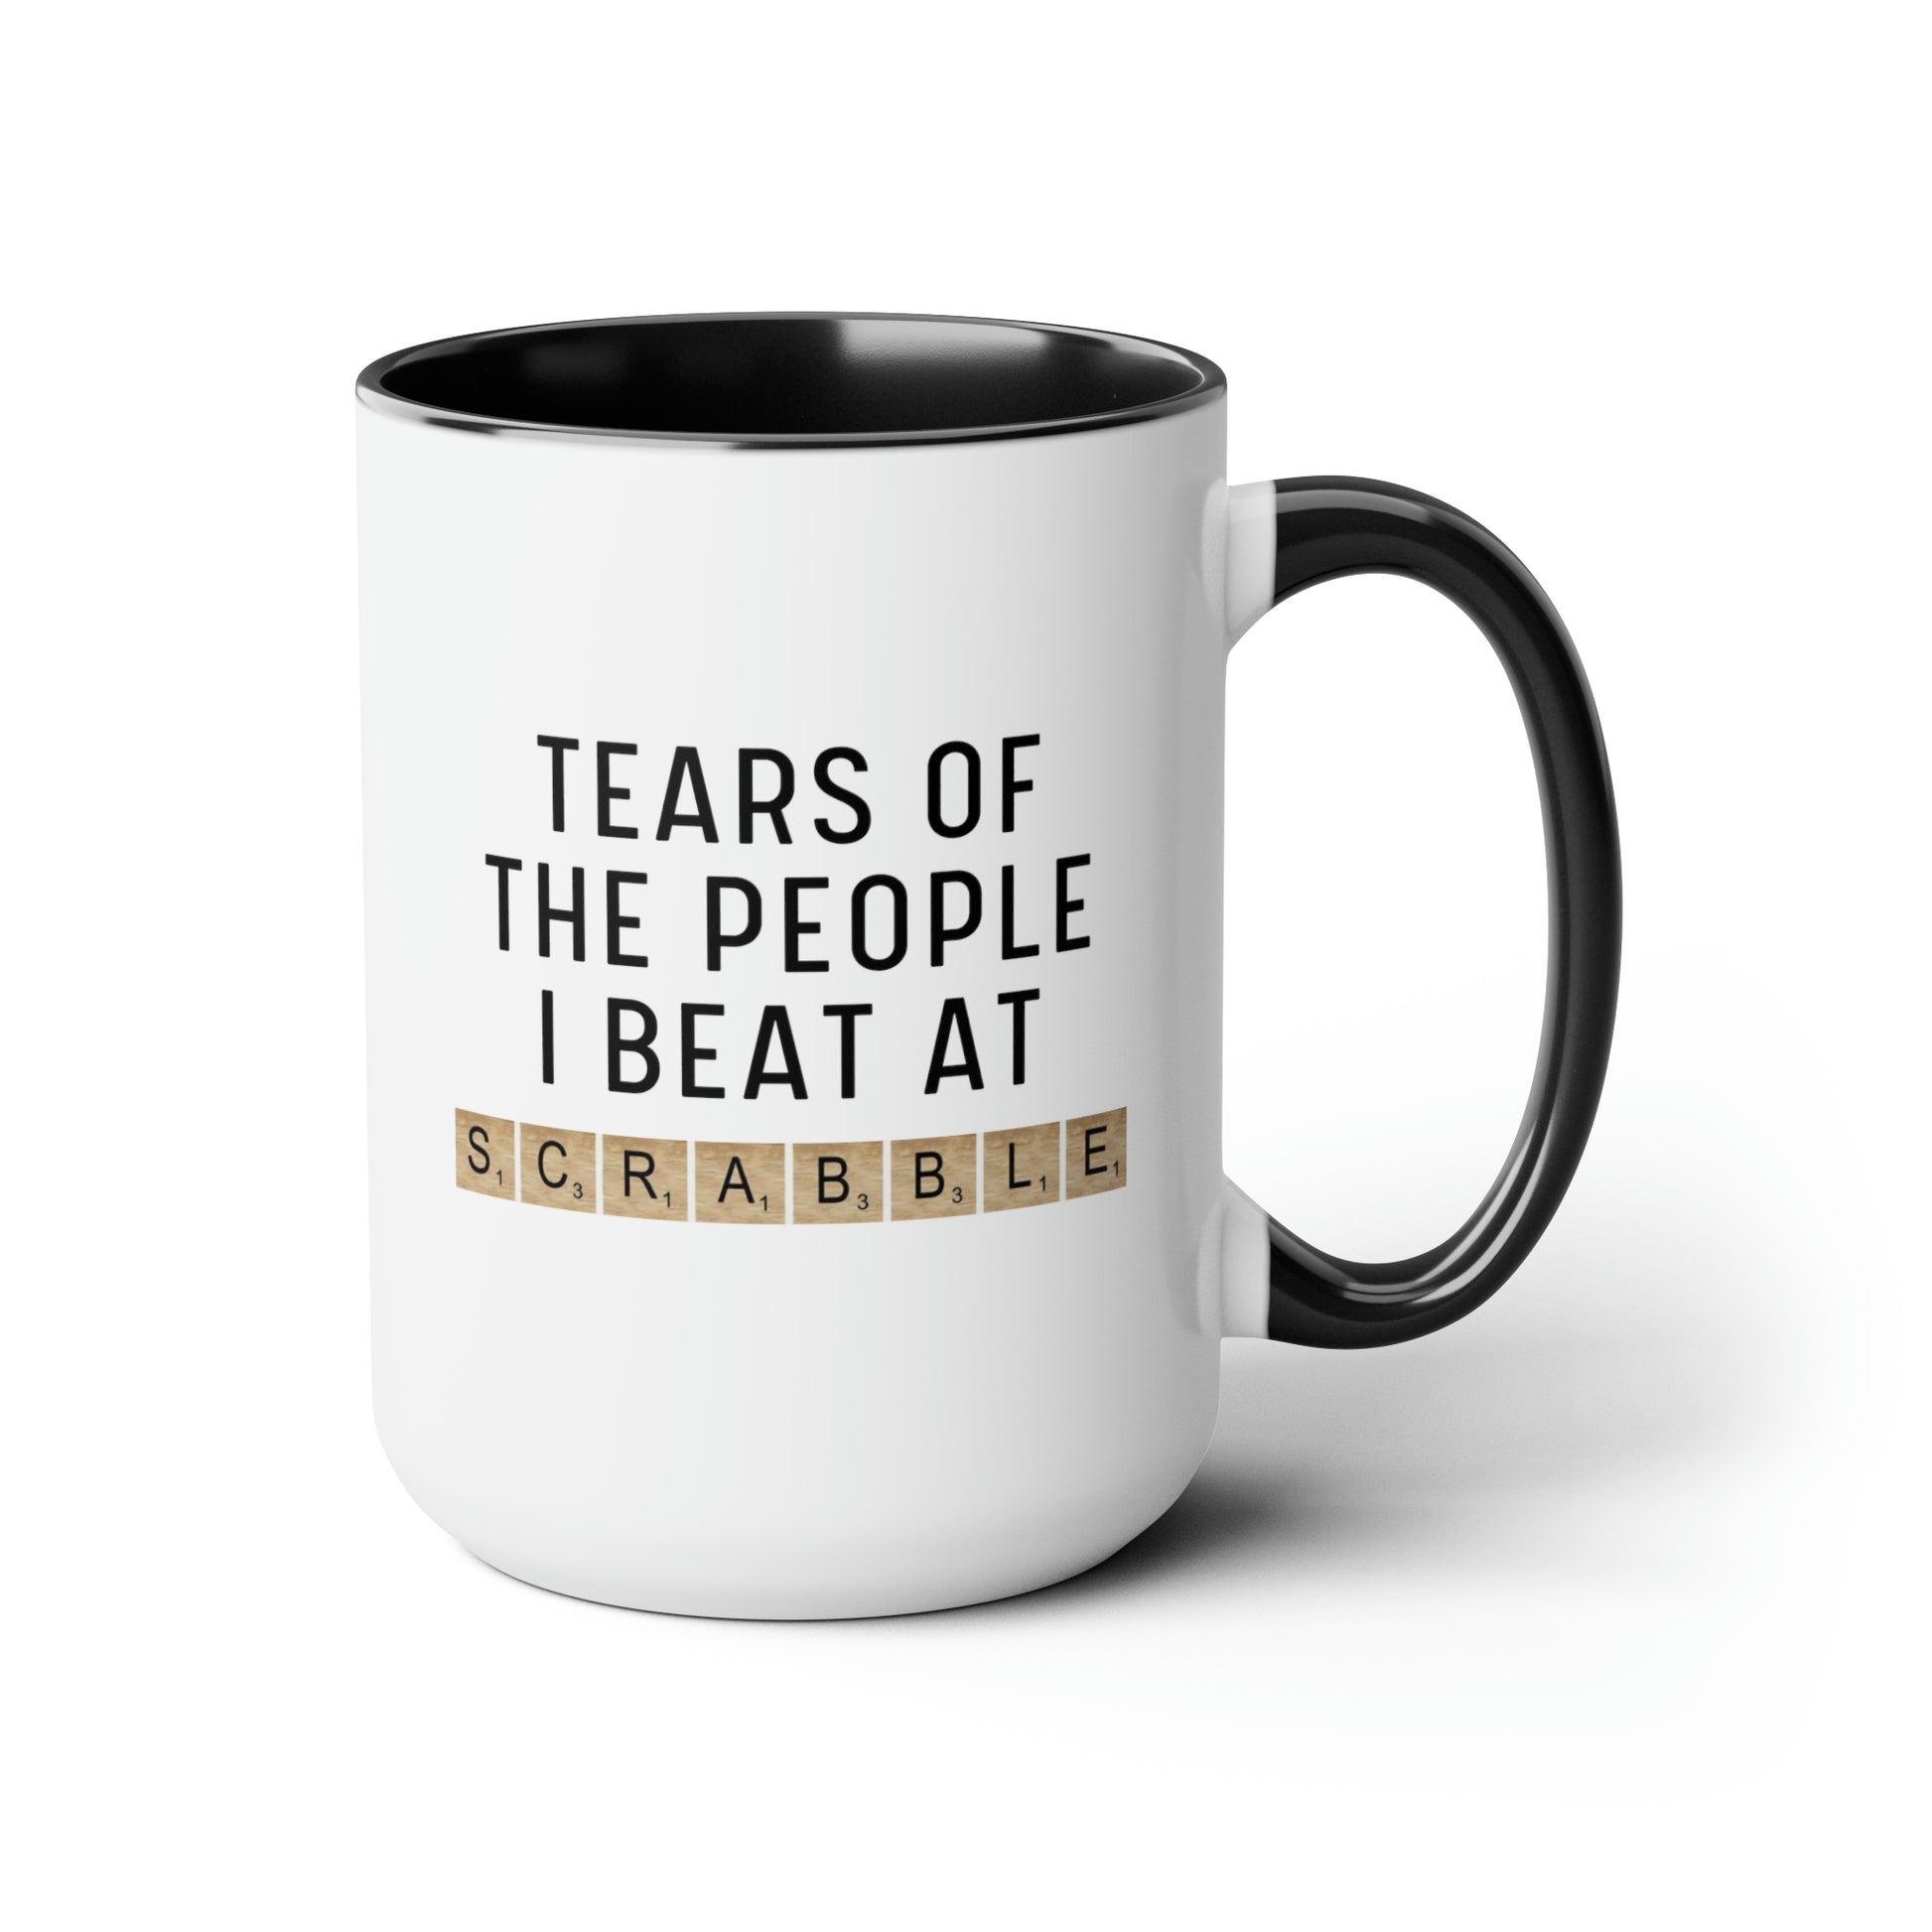 Tears of the People I Beat at Scrabble 15oz white with black accent Funny large Coffee Mug Player Gift Board Game Tiles Lover Gift waveywares wavey wares wavywares wavy wares